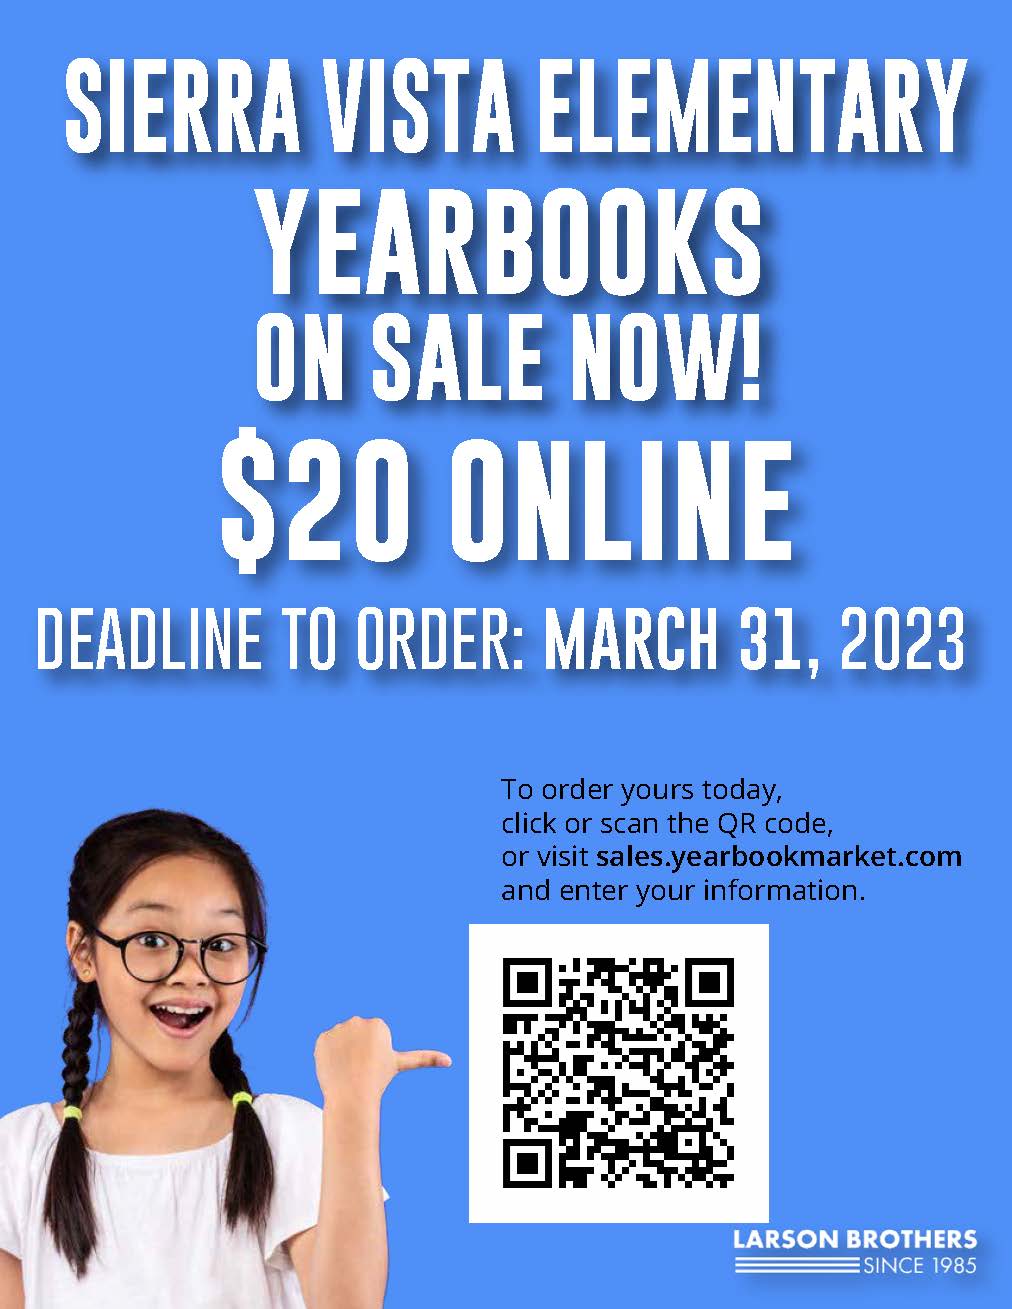 Flyer for Yearbook Sales